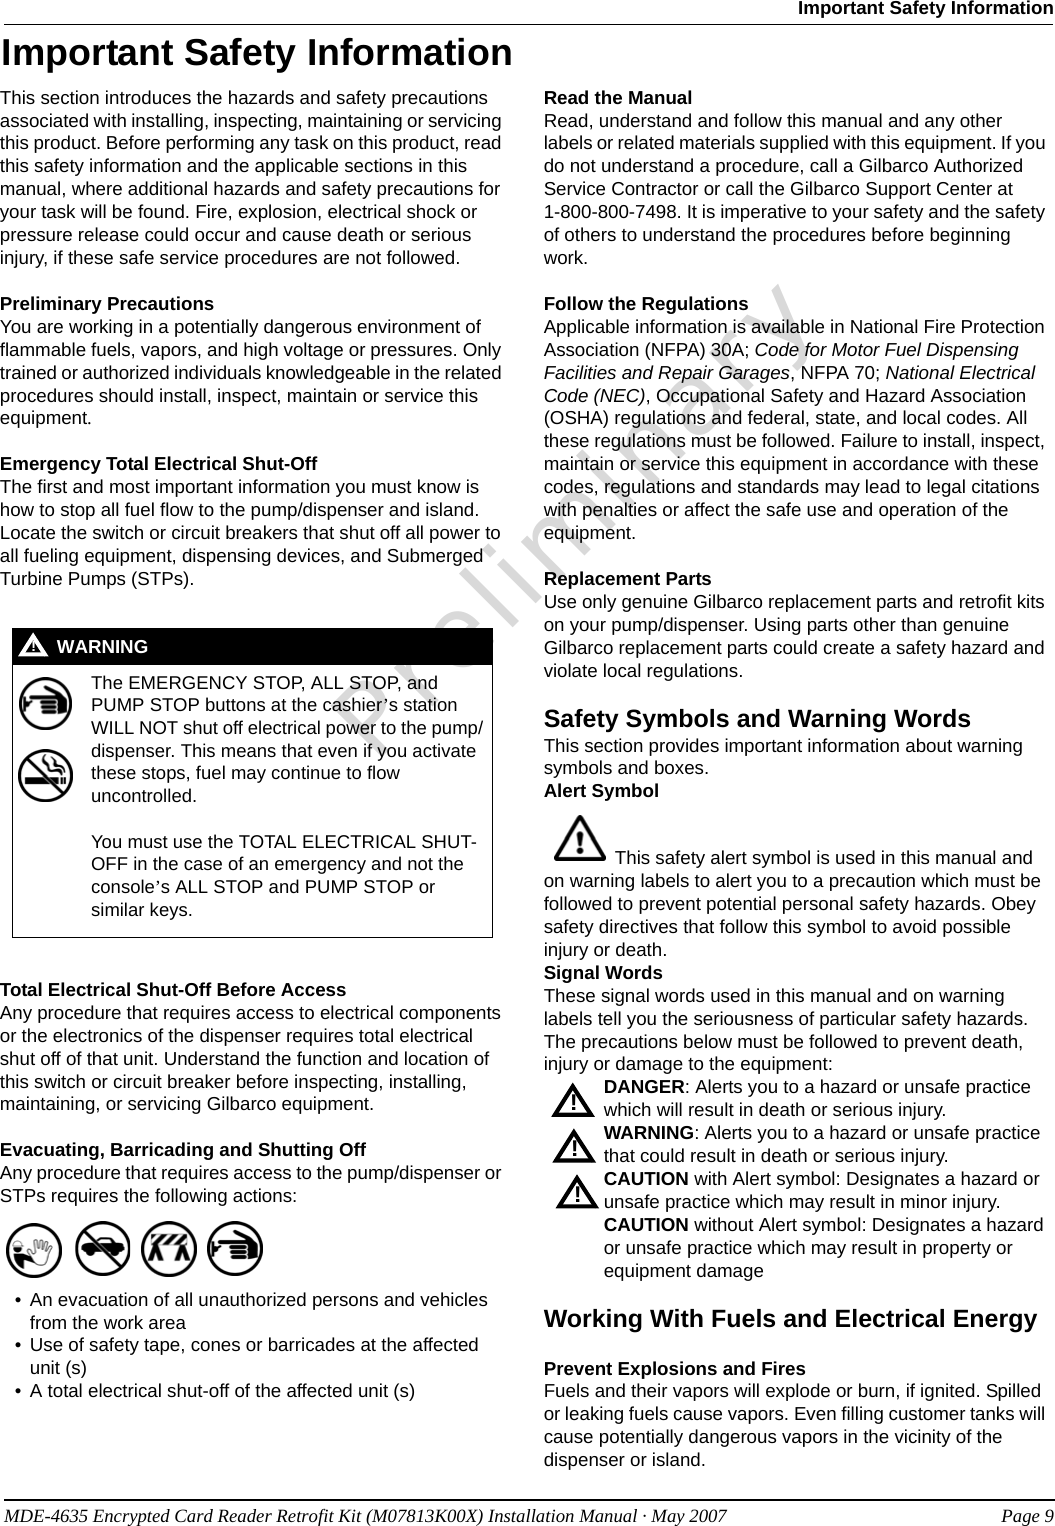 MDE-4635 Encrypted Card Reader Retrofit Kit (M07813K00X) Installation Manual · May 2007 Page 9Important Safety InformationPreliminaryImportant Safety InformationThis section introduces the hazards and safety precautions associated with installing, inspecting, maintaining or servicing this product. Before performing any task on this product, read this safety information and the applicable sections in this manual, where additional hazards and safety precautions for your task will be found. Fire, explosion, electrical shock or pressure release could occur and cause death or serious injury, if these safe service procedures are not followed. Preliminary PrecautionsYou are working in a potentially dangerous environment of flammable fuels, vapors, and high voltage or pressures. Only trained or authorized individuals knowledgeable in the related procedures should install, inspect, maintain or service this equipment.Emergency Total Electrical Shut-OffThe first and most important information you must know is how to stop all fuel flow to the pump/dispenser and island. Locate the switch or circuit breakers that shut off all power to all fueling equipment, dispensing devices, and Submerged Turbine Pumps (STPs).  Total Electrical Shut-Off Before AccessAny procedure that requires access to electrical components or the electronics of the dispenser requires total electrical shut off of that unit. Understand the function and location of this switch or circuit breaker before inspecting, installing, maintaining, or servicing Gilbarco equipment.Evacuating, Barricading and Shutting OffAny procedure that requires access to the pump/dispenser or STPs requires the following actions:• An evacuation of all unauthorized persons and vehicles from the work area • Use of safety tape, cones or barricades at the affected unit (s)• A total electrical shut-off of the affected unit (s)Read the ManualRead, understand and follow this manual and any other labels or related materials supplied with this equipment. If you do not understand a procedure, call a Gilbarco Authorized Service Contractor or call the Gilbarco Support Center at      1-800-800-7498. It is imperative to your safety and the safety of others to understand the procedures before beginning work.Follow the RegulationsApplicable information is available in National Fire Protection Association (NFPA) 30A; Code for Motor Fuel Dispensing Facilities and Repair Garages, NFPA 70; National Electrical Code (NEC), Occupational Safety and Hazard Association (OSHA) regulations and federal, state, and local codes. All these regulations must be followed. Failure to install, inspect, maintain or service this equipment in accordance with these codes, regulations and standards may lead to legal citations with penalties or affect the safe use and operation of the equipment.Replacement PartsUse only genuine Gilbarco replacement parts and retrofit kits on your pump/dispenser. Using parts other than genuine Gilbarco replacement parts could create a safety hazard and violate local regulations.Safety Symbols and Warning WordsThis section provides important information about warning symbols and boxes.Alert Symbol   This safety alert symbol is used in this manual and on warning labels to alert you to a precaution which must be followed to prevent potential personal safety hazards. Obey safety directives that follow this symbol to avoid possible injury or death.Signal WordsThese signal words used in this manual and on warning labels tell you the seriousness of particular safety hazards. The precautions below must be followed to prevent death, injury or damage to the equipment:DANGER: Alerts you to a hazard or unsafe practice which will result in death or serious injury.WARNING: Alerts you to a hazard or unsafe practice that could result in death or serious injury. CAUTION with Alert symbol: Designates a hazard or unsafe practice which may result in minor injury.CAUTION without Alert symbol: Designates a hazard or unsafe practice which may result in property or equipment damageWorking With Fuels and Electrical EnergyPrevent Explosions and FiresFuels and their vapors will explode or burn, if ignited. Spilled or leaking fuels cause vapors. Even filling customer tanks will cause potentially dangerous vapors in the vicinity of the dispenser or island.The EMERGENCY STOP, ALL STOP, and PUMP STOP buttons at the cashier’s station WILL NOT shut off electrical power to the pump/dispenser. This means that even if you activate these stops, fuel may continue to flow uncontrolled. You must use the TOTAL ELECTRICAL SHUT-OFF in the case of an emergency and not the console’s ALL STOP and PUMP STOP or similar keys.!WARNING!!!!